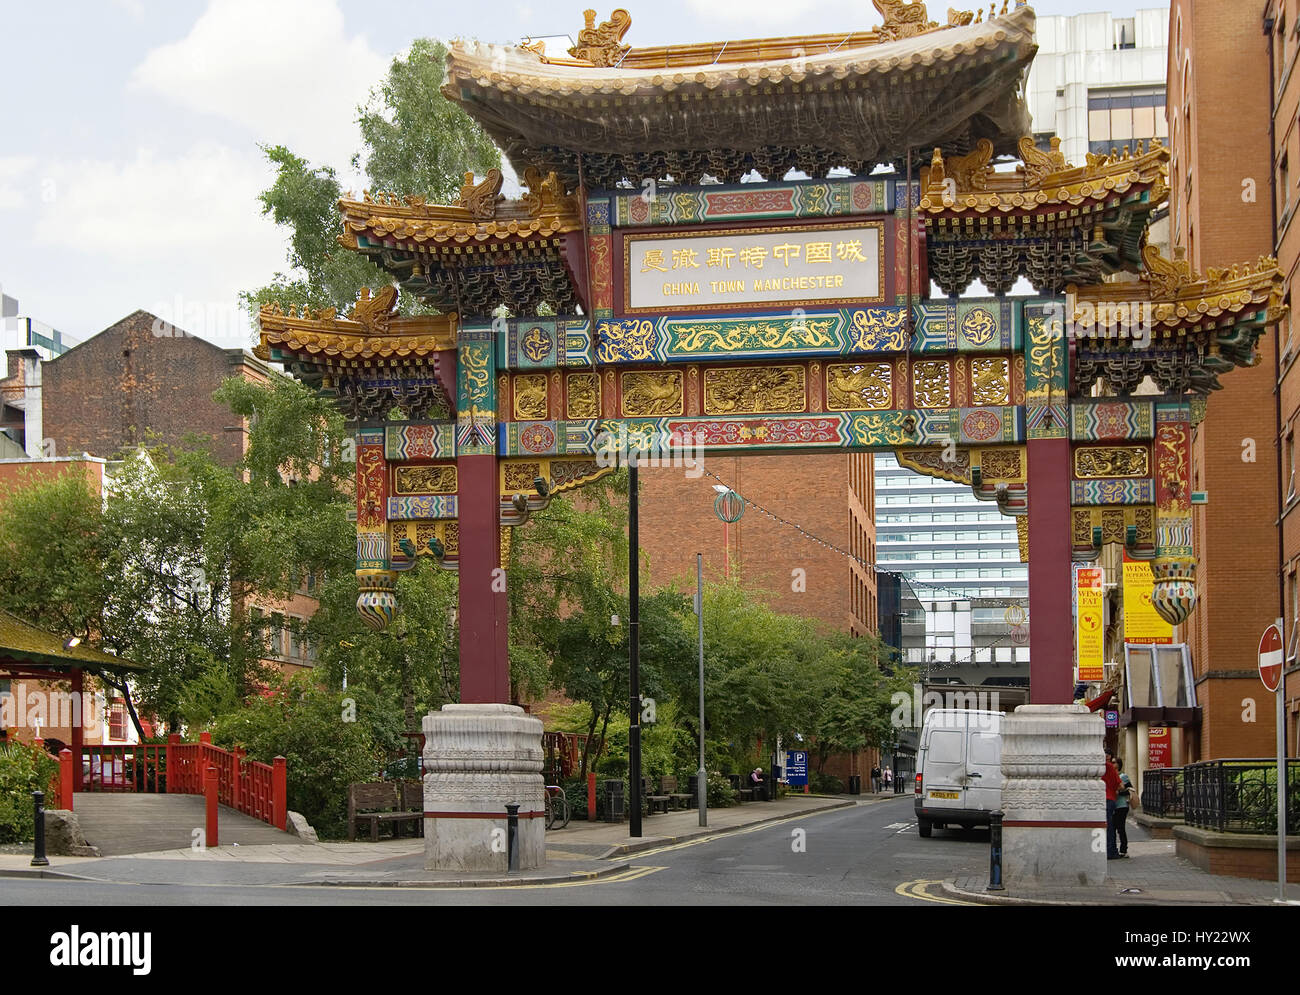 Manchester's Chinatown is the second largest Chinatown in the United Kingdom and the third largest Chinatown in Europe. It is located in east central  Stock Photo